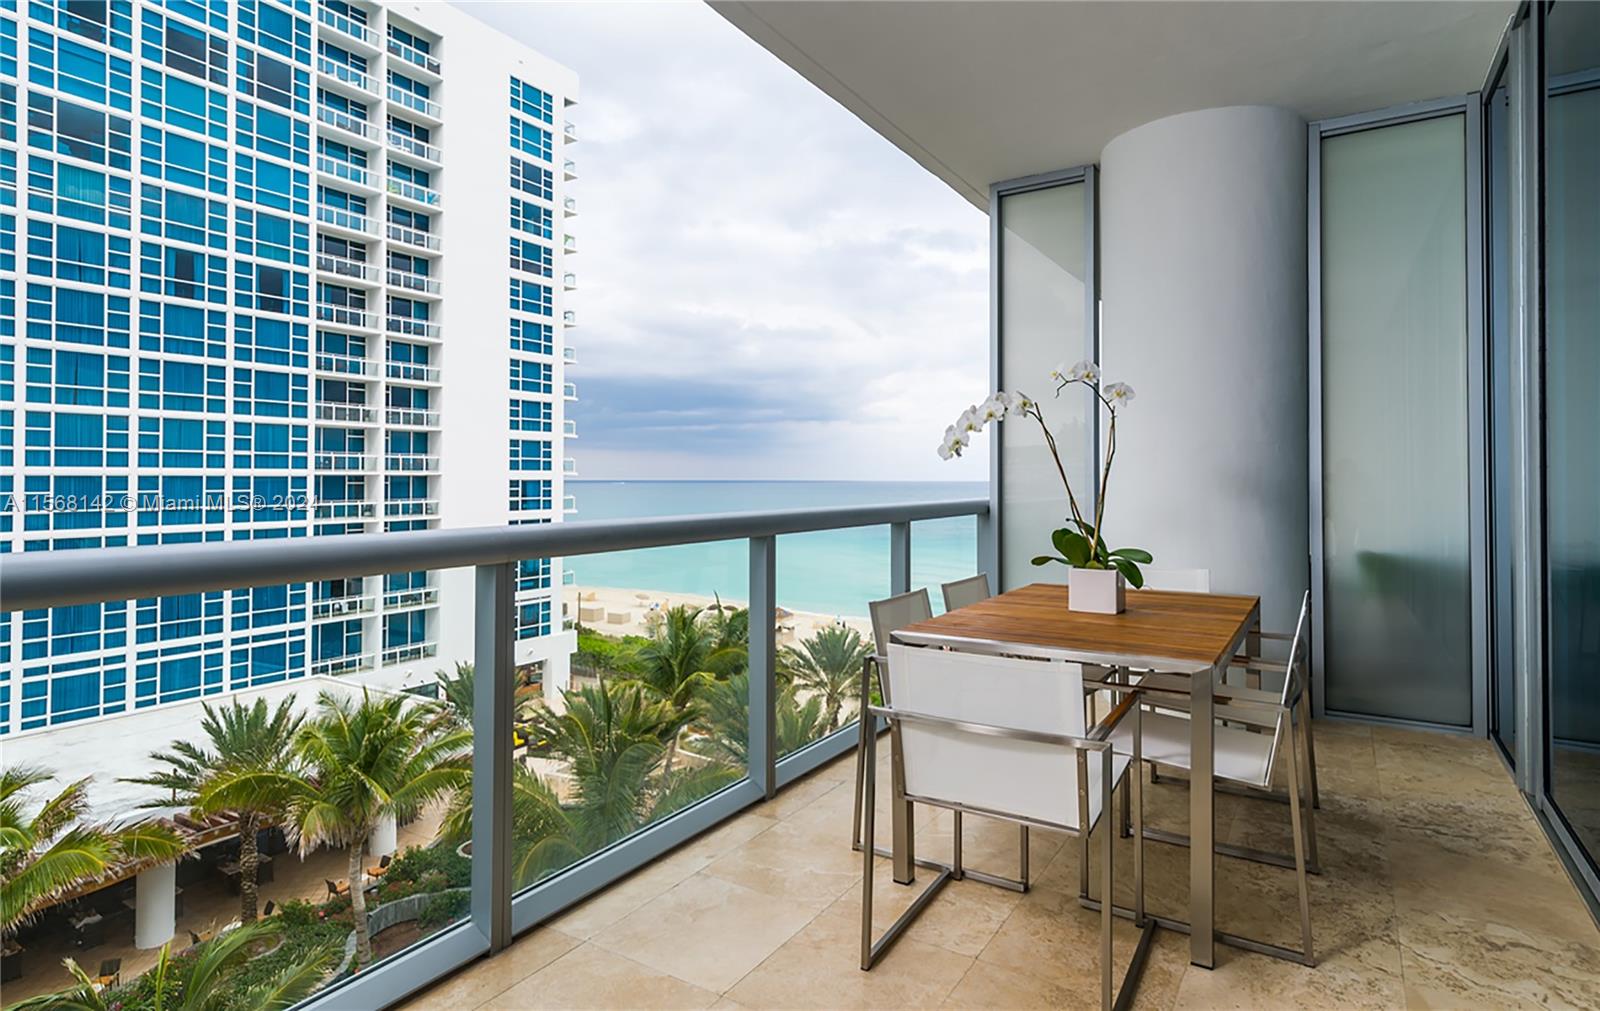 This spacious 2 Bedroom 2 Bath furnished unit is the perfect combination of high style and tranquil beach living. Beautifully decorated, this oceanfront condo has a lofty feel complete with 12 foot high ceilings. The living area opens to a huge balcony with views of the ocean & plenty of room for outdoor dining. Enjoy all the amenities of a 5-star hotel, 4 pools, 24hr concierge, private beach attendants, onsite restaurant & bar. An award-winning spa, daily workout classes, beach club, salon, dog park, and rock wall climbing. An on-site organic restaurant, juice bar and pop-in gourmet cafe. Property is directly across from Starbucks, Publix and a quick Uber ride to South beach nightlife, Wynwood and airports. Available from May through November. No winter inquiries.